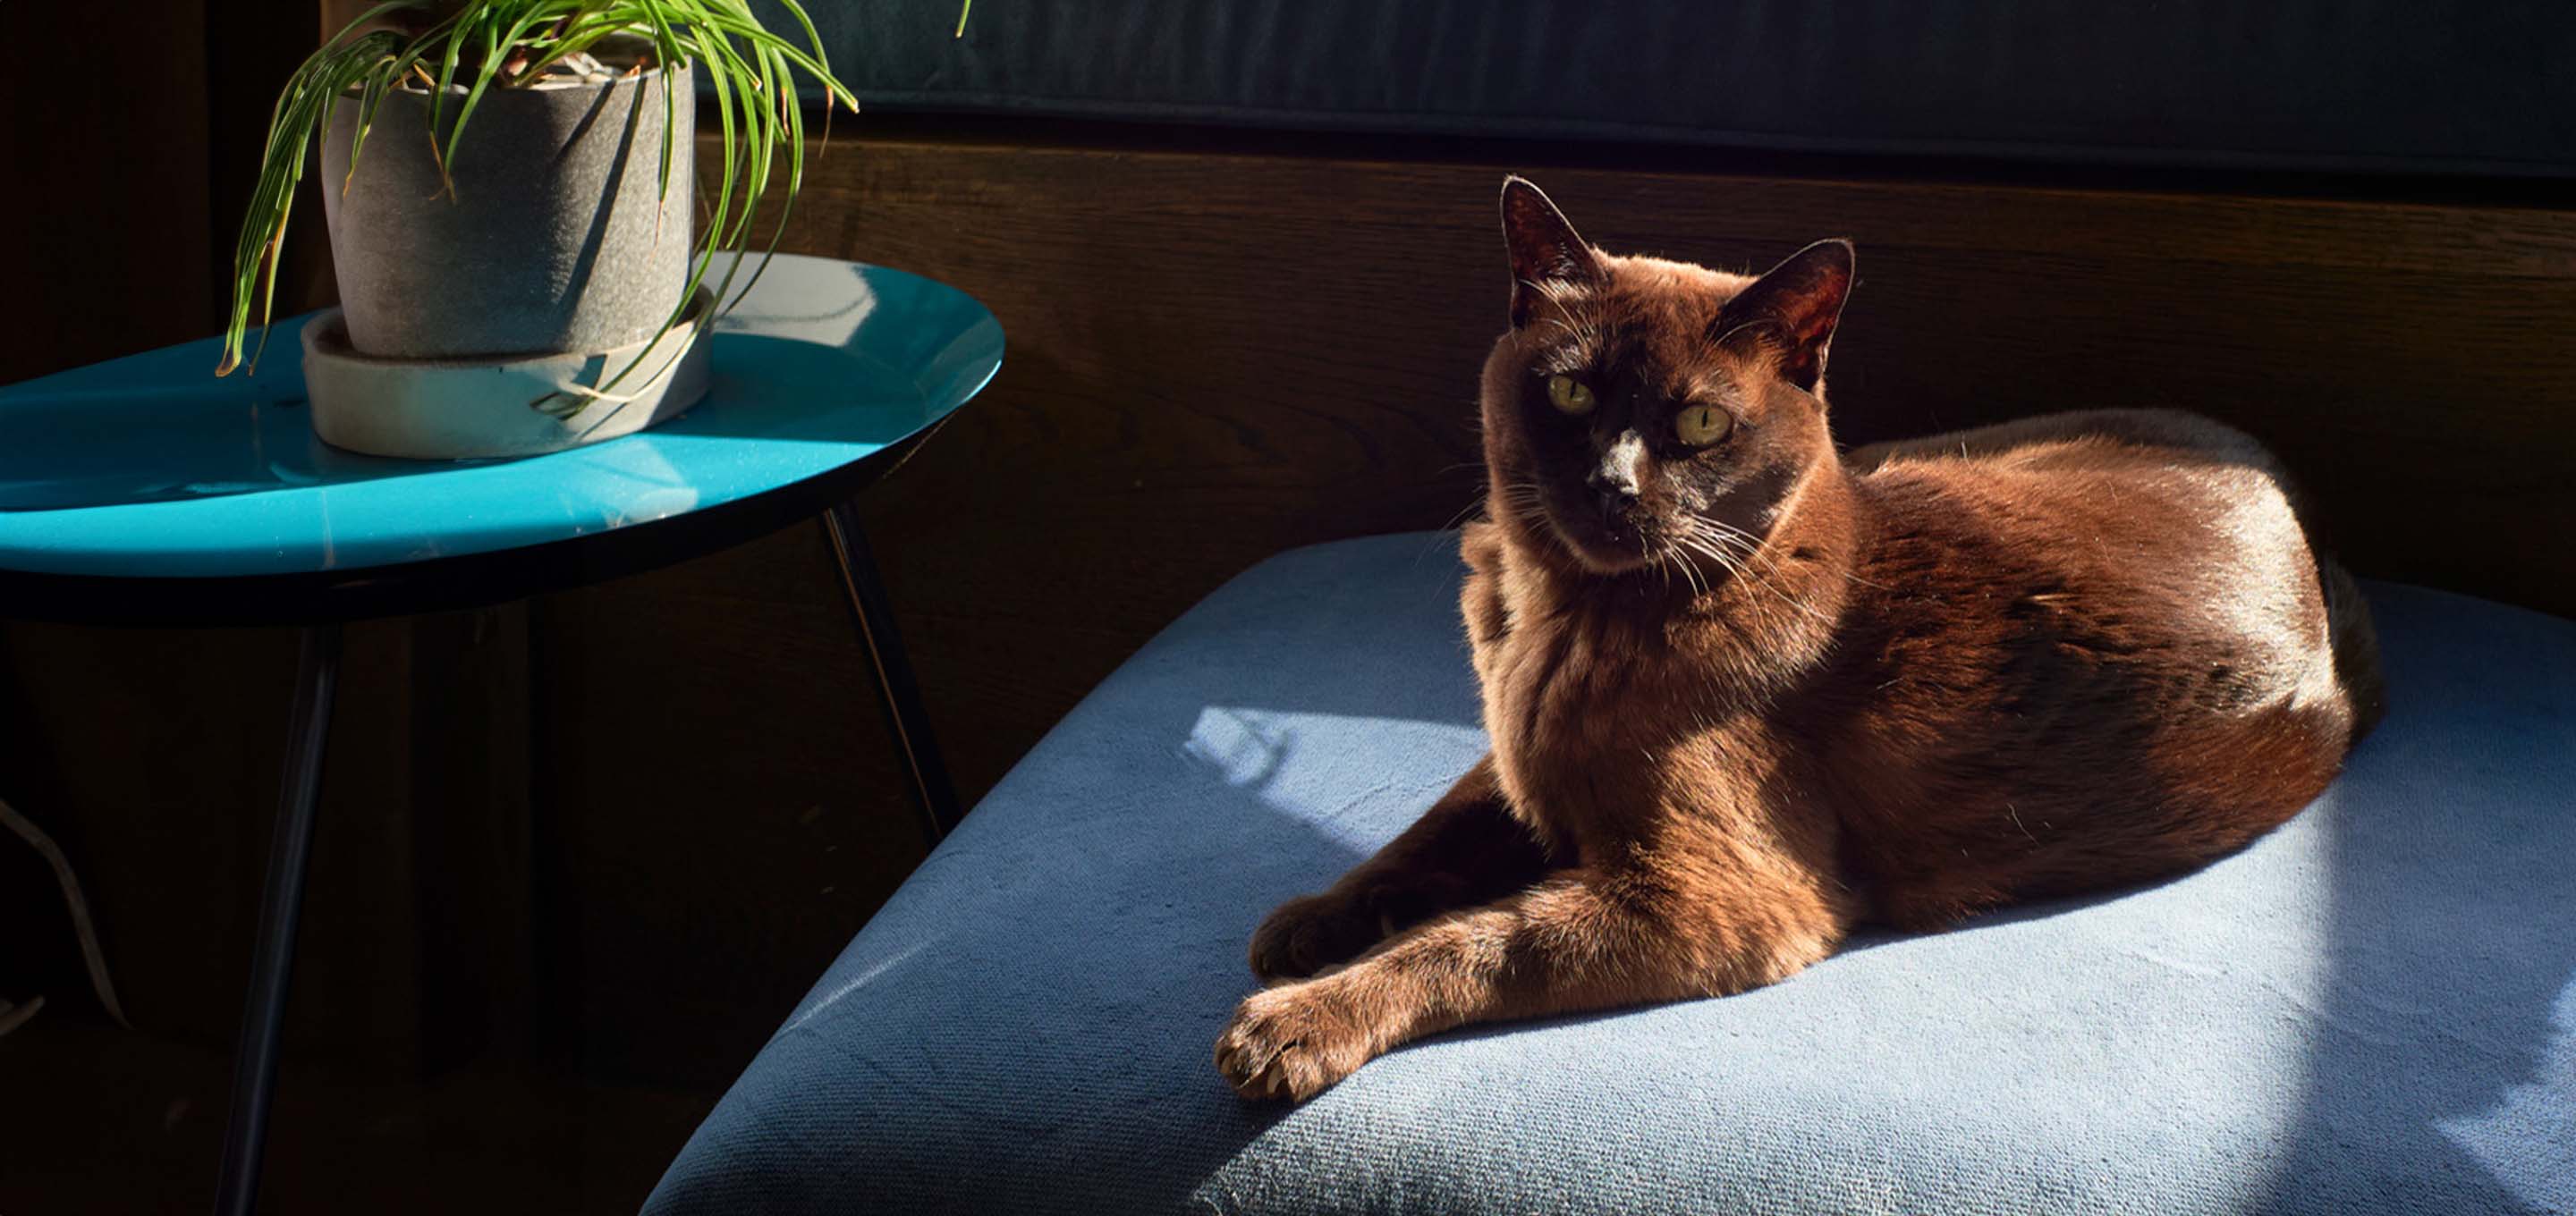 Europeon Burmese cat sitting on couch image